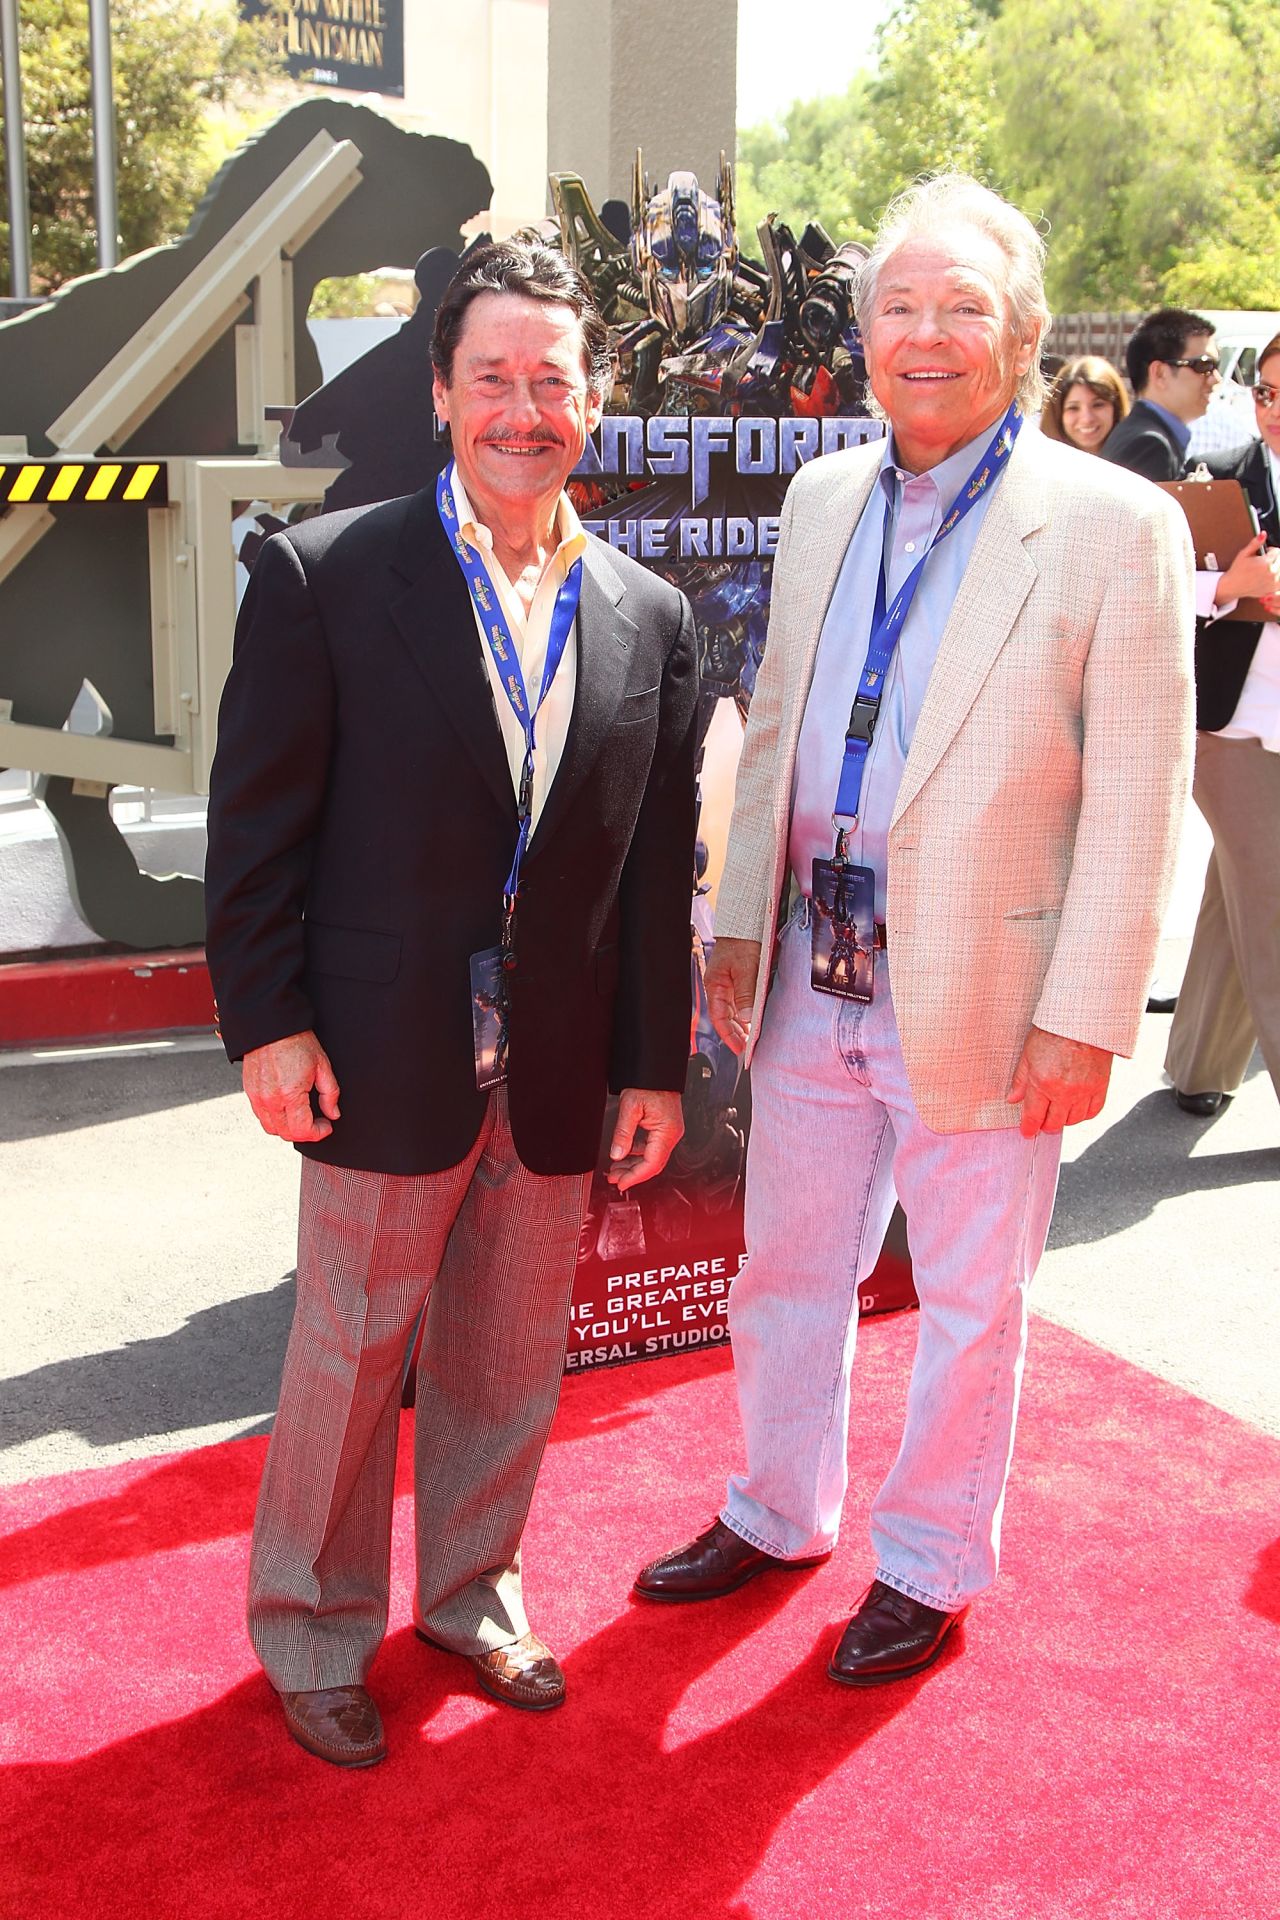 Optimus Prime and Megatron, the yin and yang of the "Transformers" franchise, have sold millions of toys for nearly 30 years, not to mention those blockbuster movies. Peter Cullen, left, has been the instantly recognizable voice of Optimus for almost all of those years. Frank Welker -- a veteran of hundreds of voice roles -- recently returned to the part of Megatron on the animated series, "Transformers Prime," co-starring with his old friend Cullen.